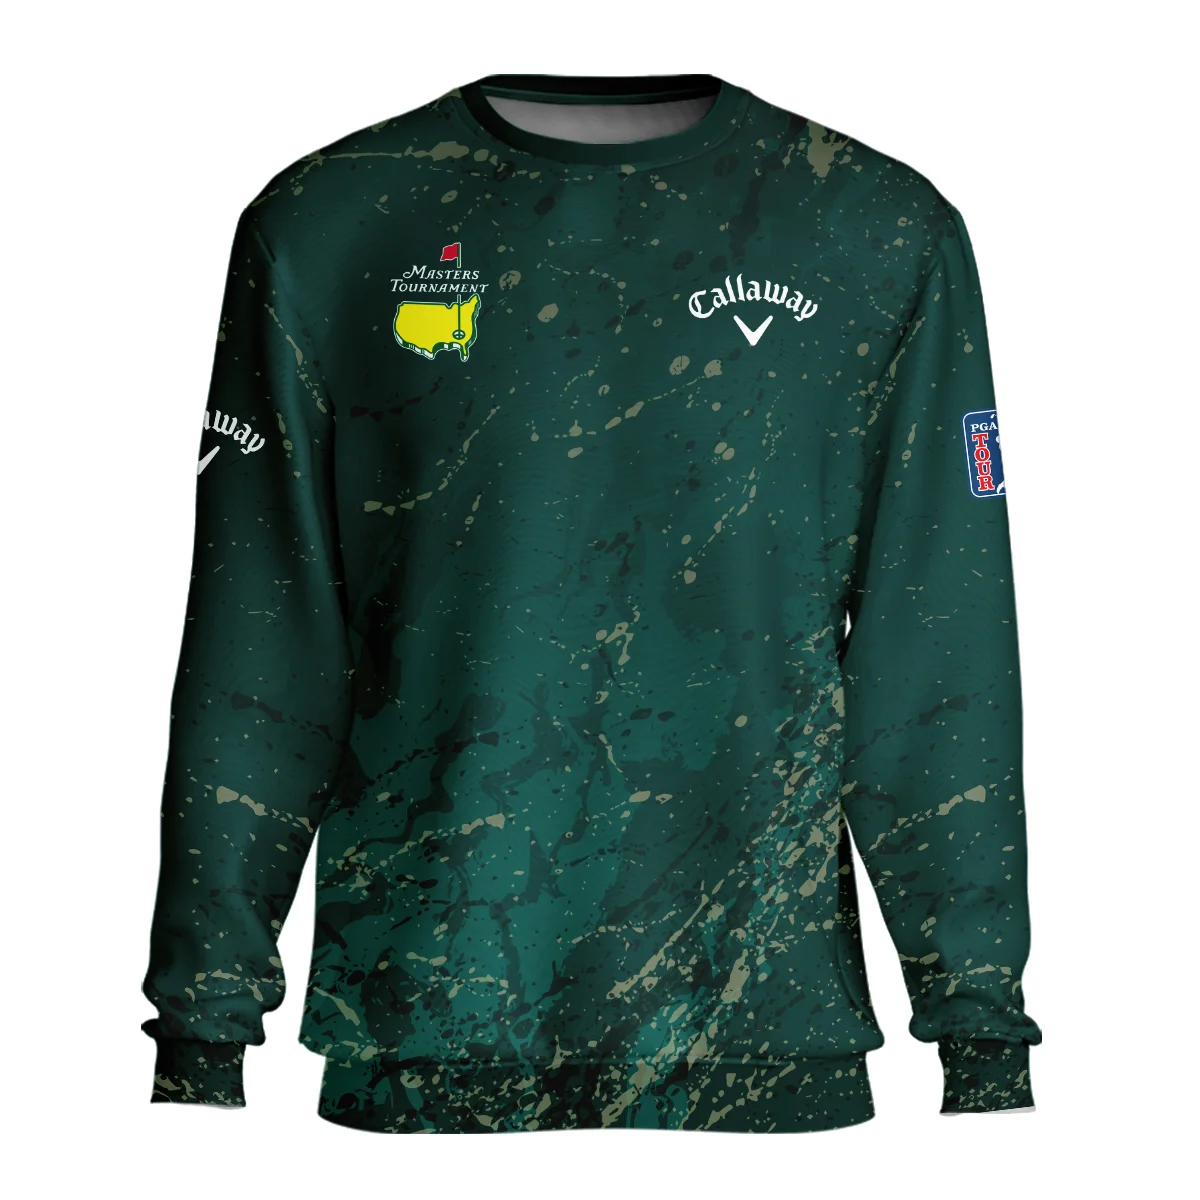 Old Cracked Texture With Gold Splash Paint Masters Tournament Callaway Hoodie Shirt Style Classic Hoodie Shirt